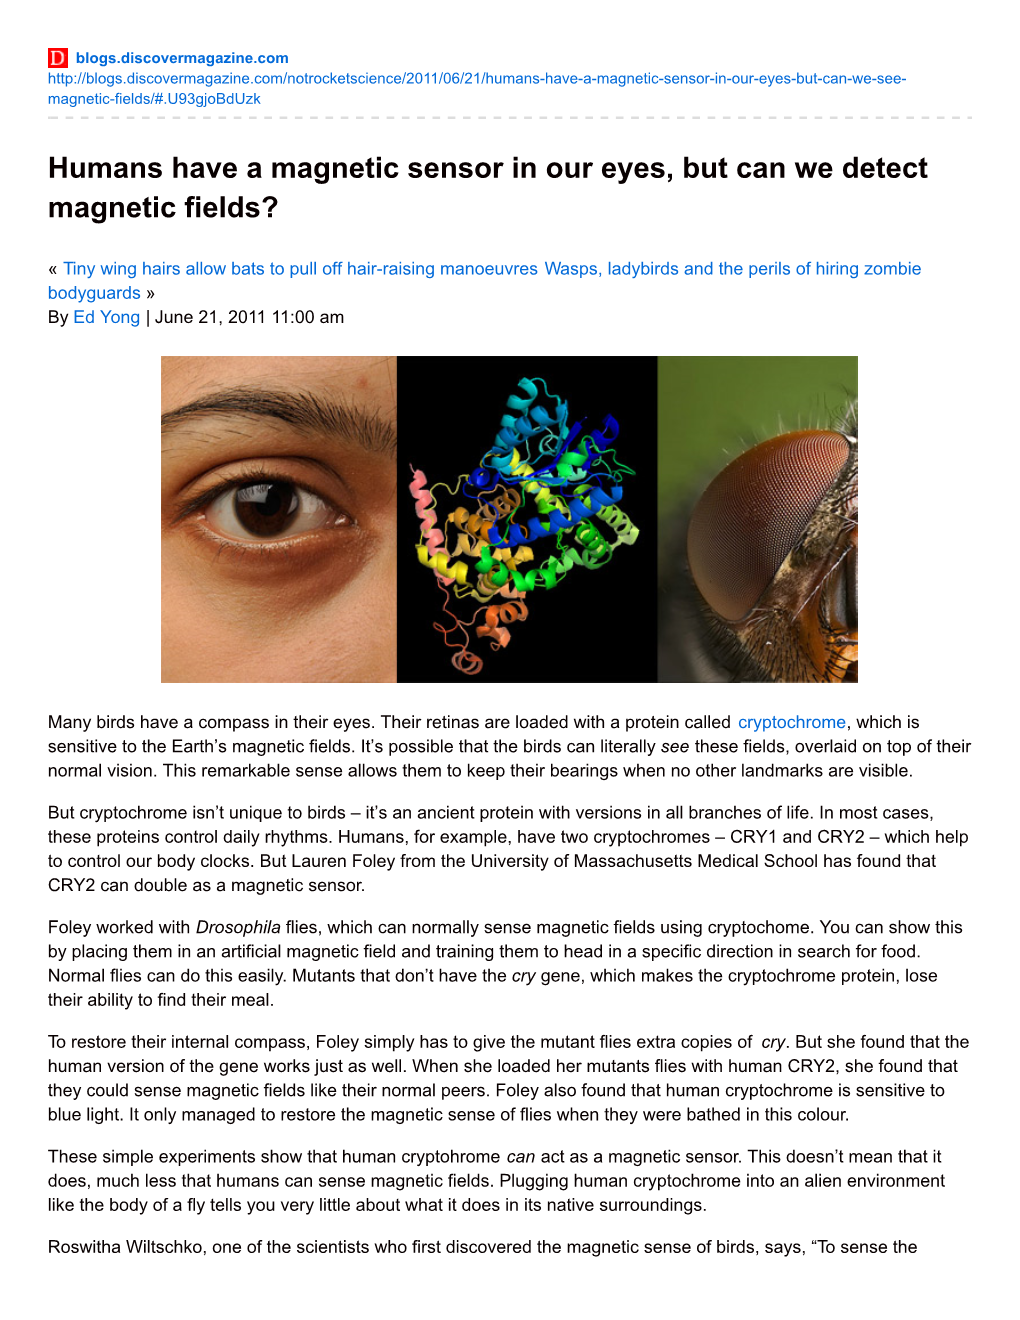 Humans Have a Magnetic Sensor in Our Eyes, but Can We Detect Magnetic Fields?